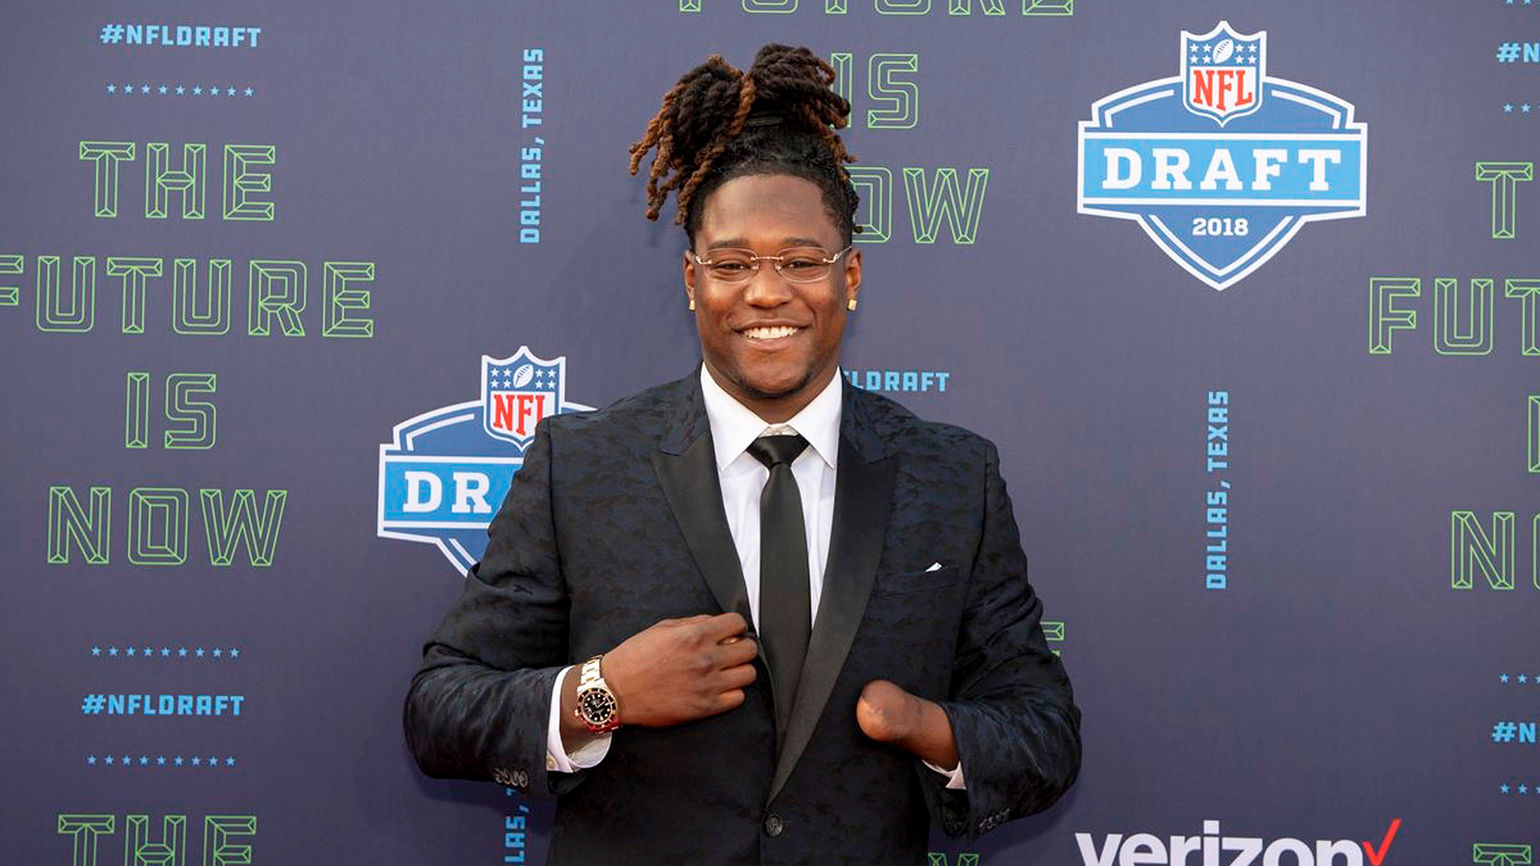 Margaritaville at Sea names NFL player Shaquem Griffin godfather of first cruise..